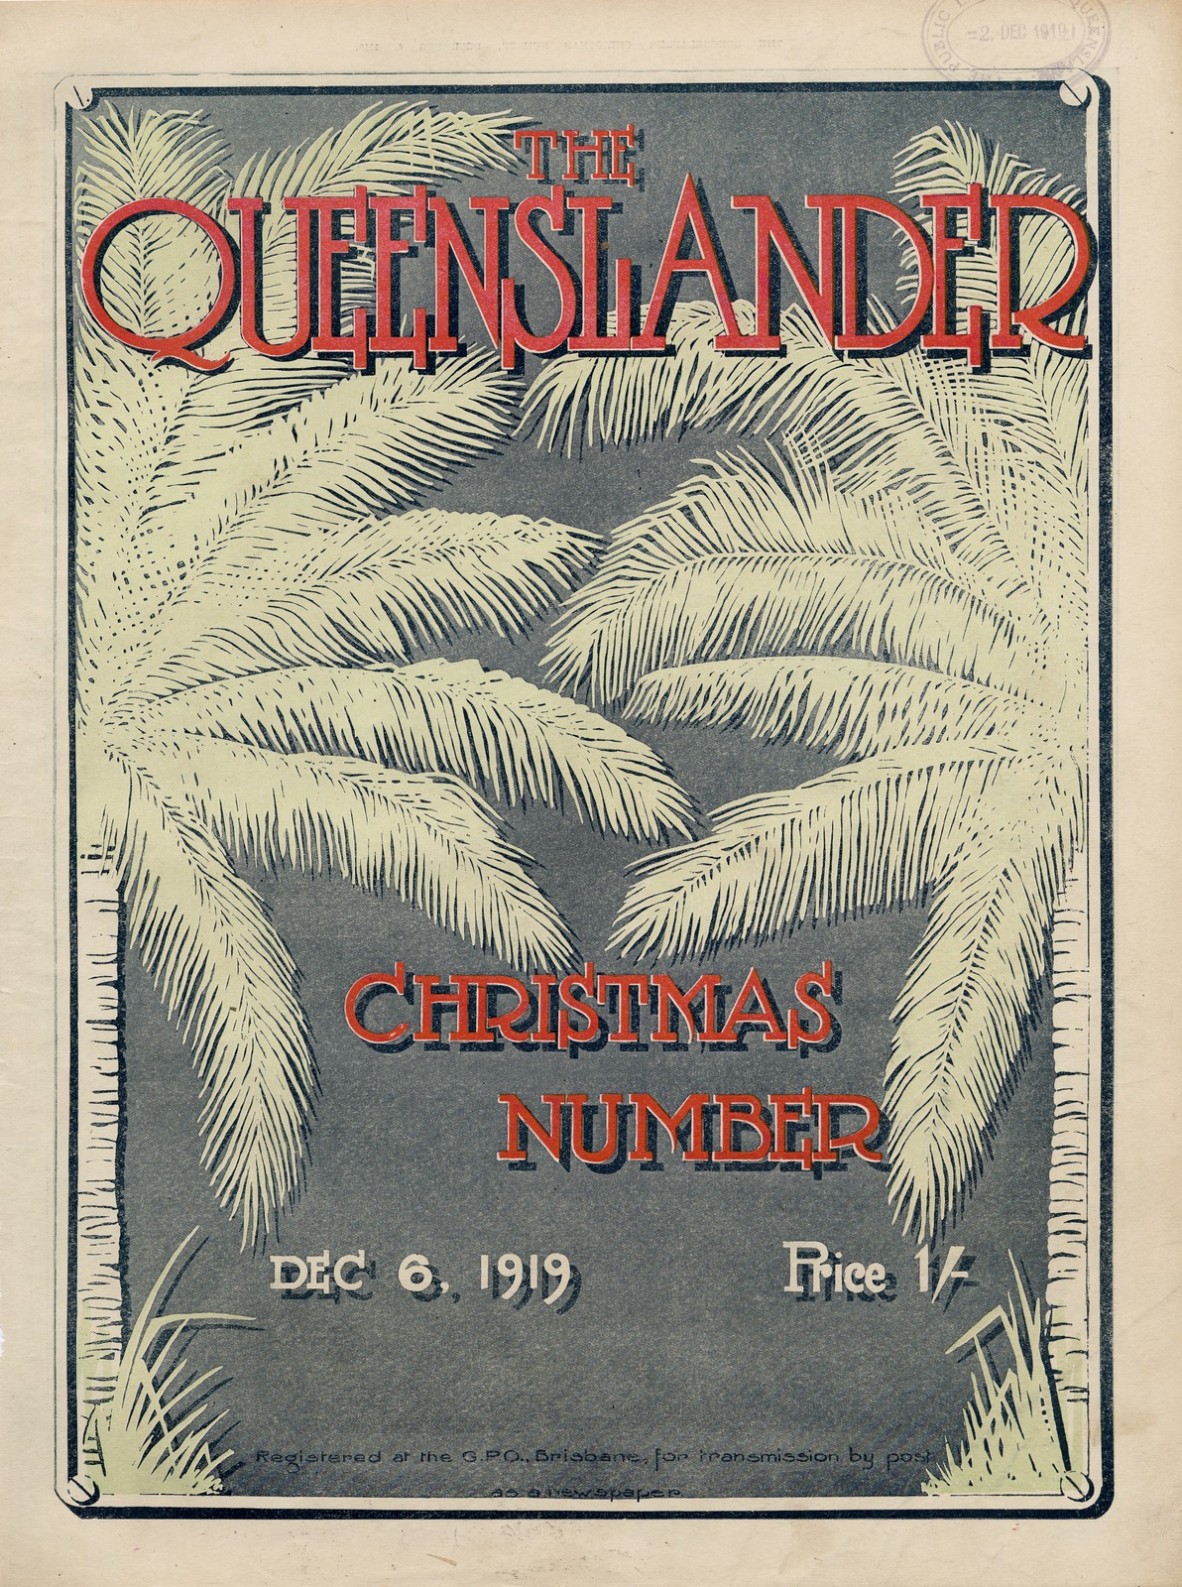 Illustrated front cover from The Queenslander December 6 1919